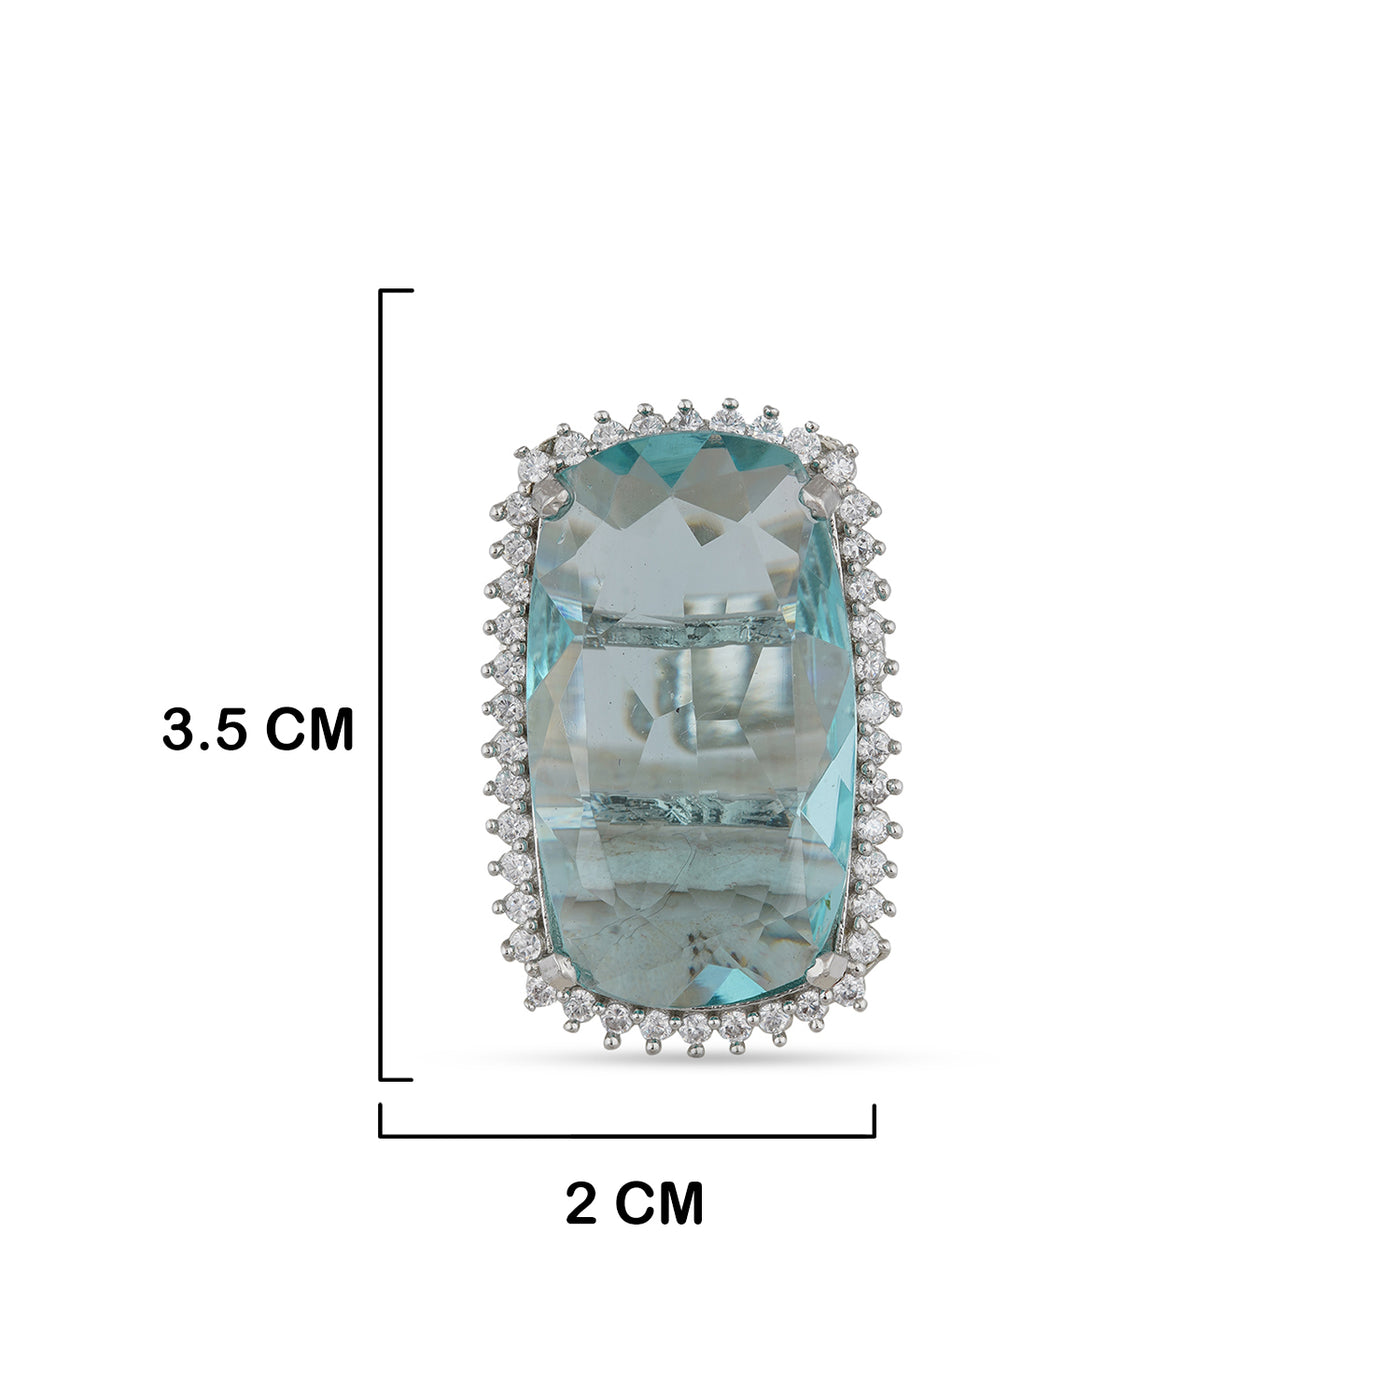 Aqua Blue CZ Ring with measurements in cm. 3.5cm by 2cm.